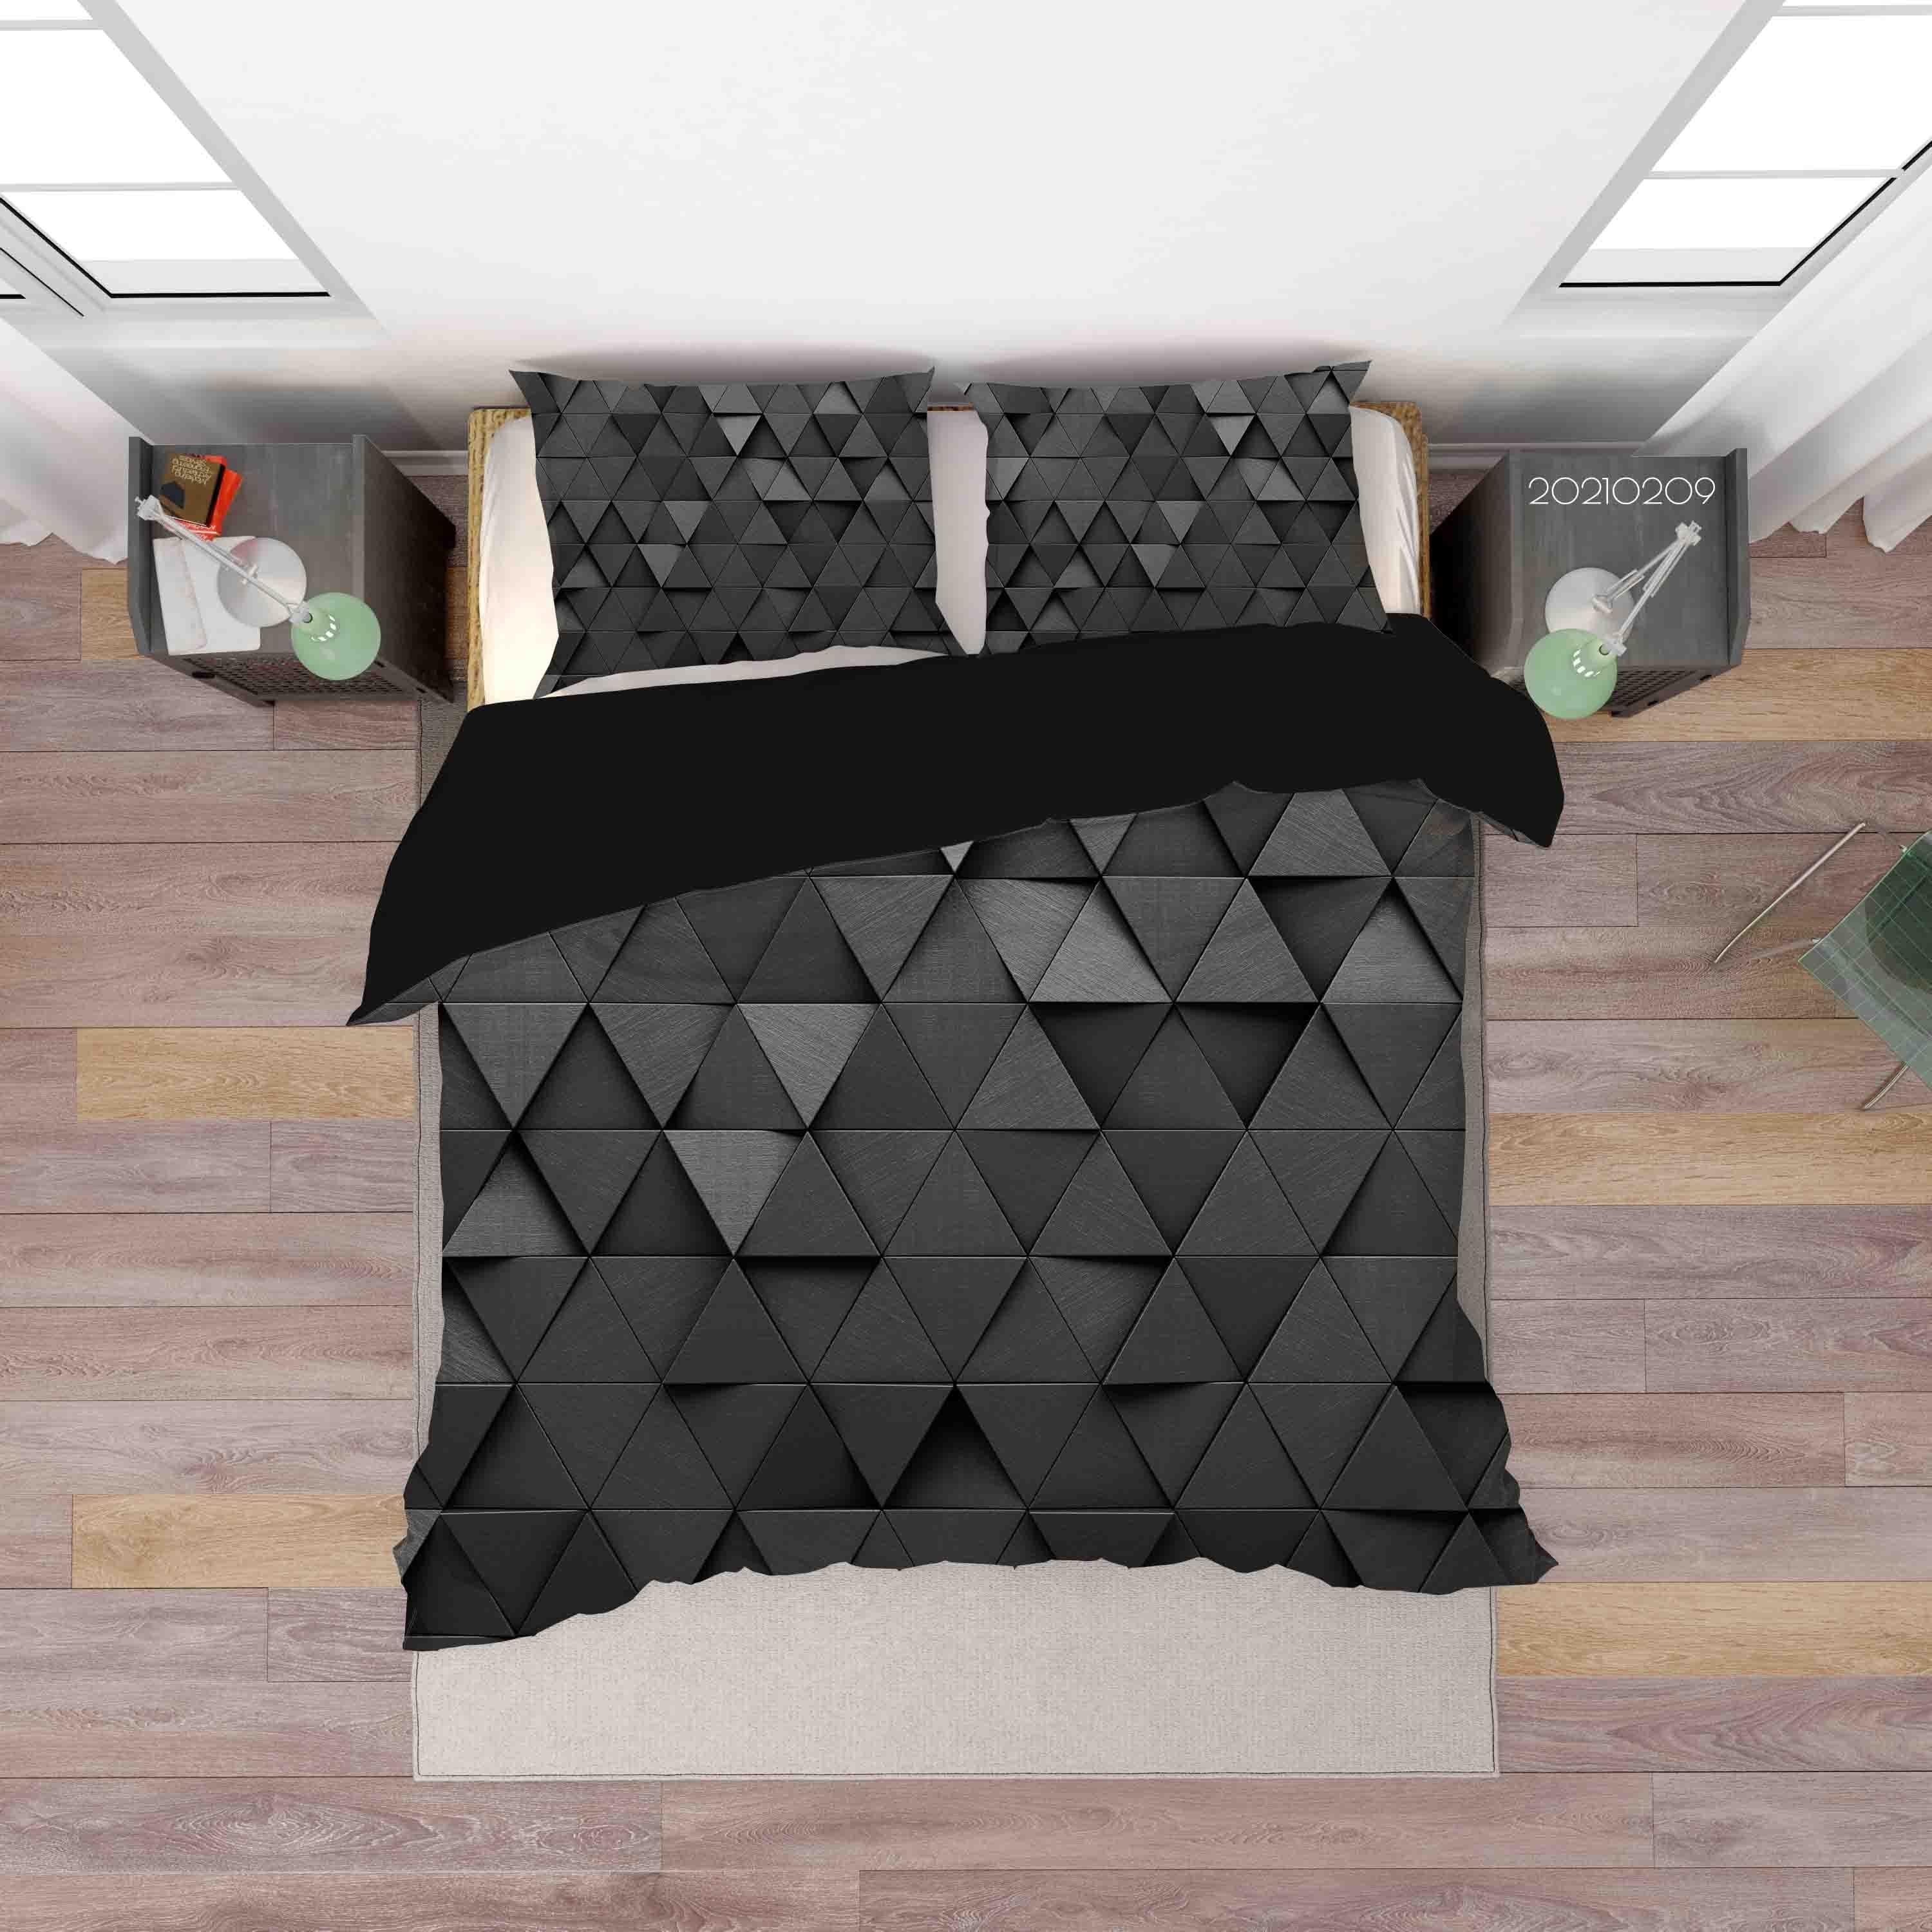 3D Abstract Black Geometry Triangle Quilt Cover Set Bedding Set Duvet Cover Pillowcases 252- Jess Art Decoration